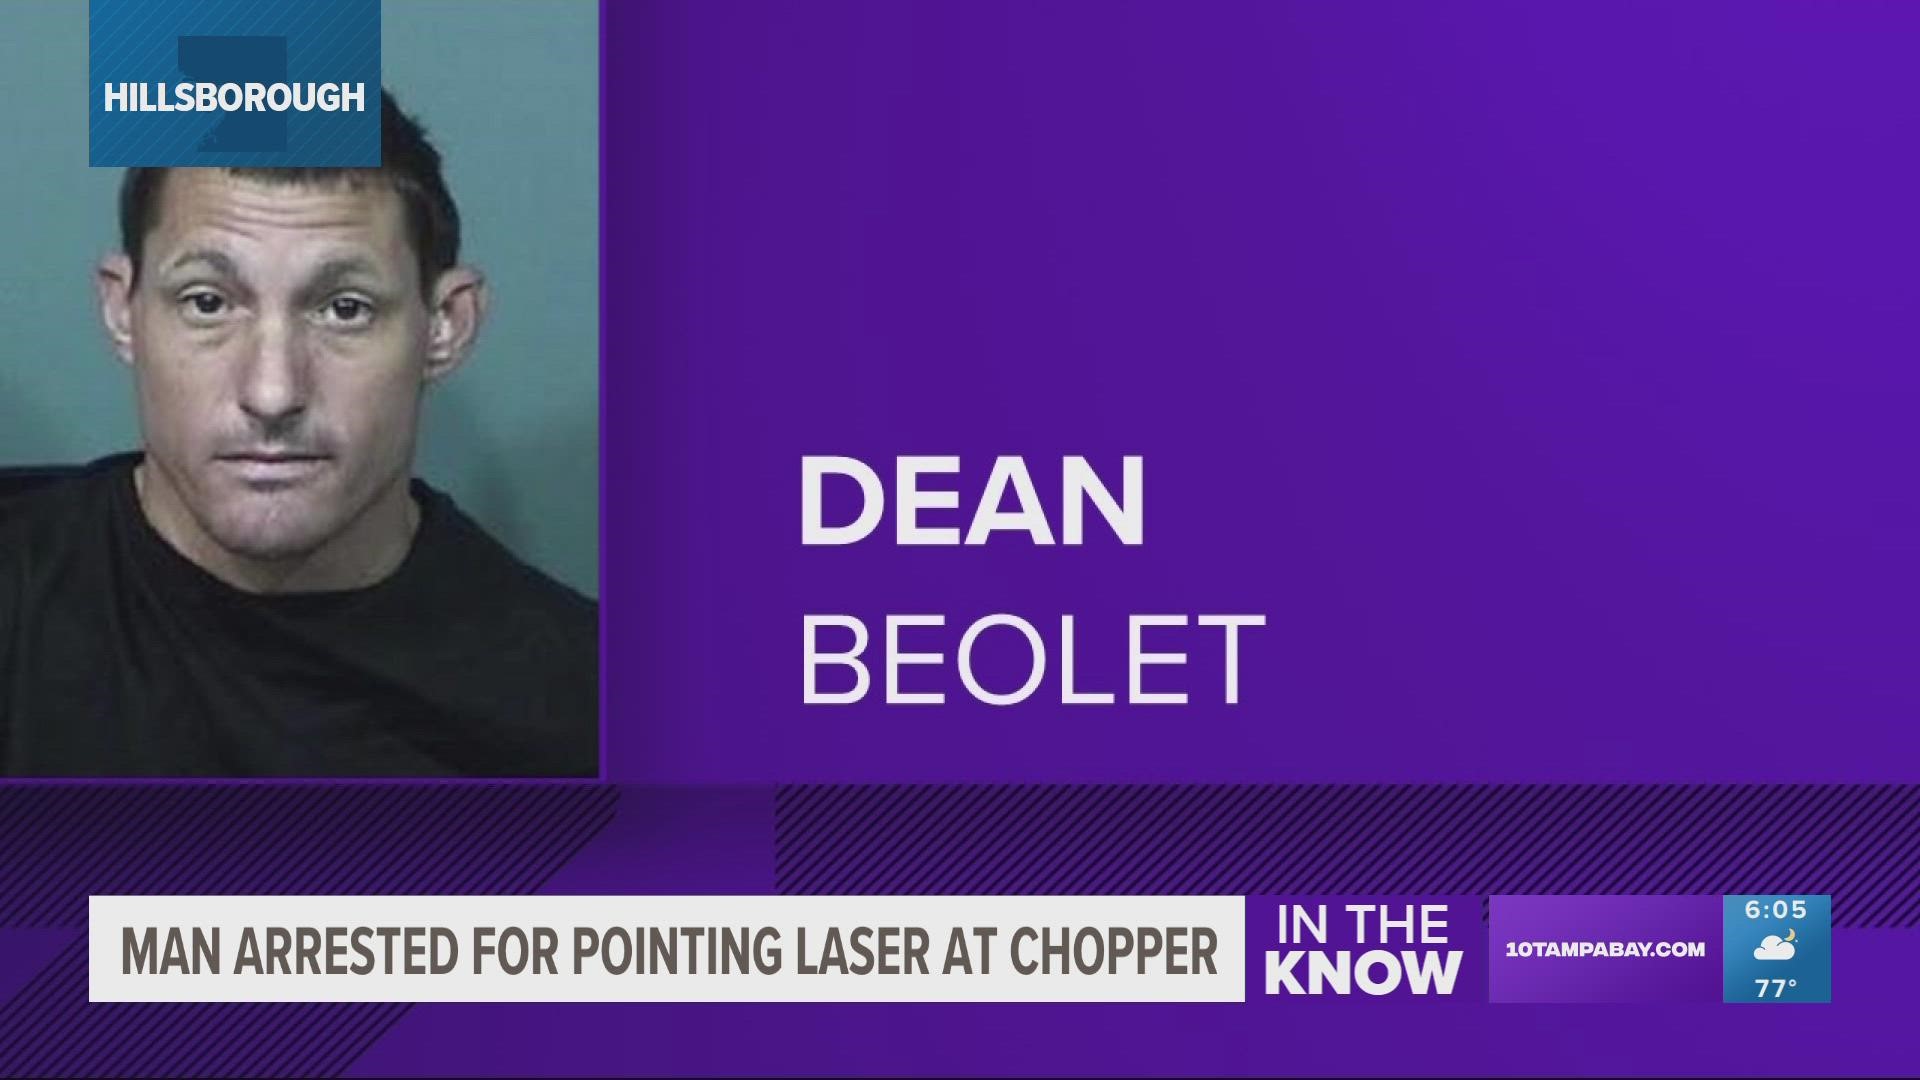 While searching for a different suspect, the 33-year-old man reportedly decided to shine a laser at the chopper "multiple times."